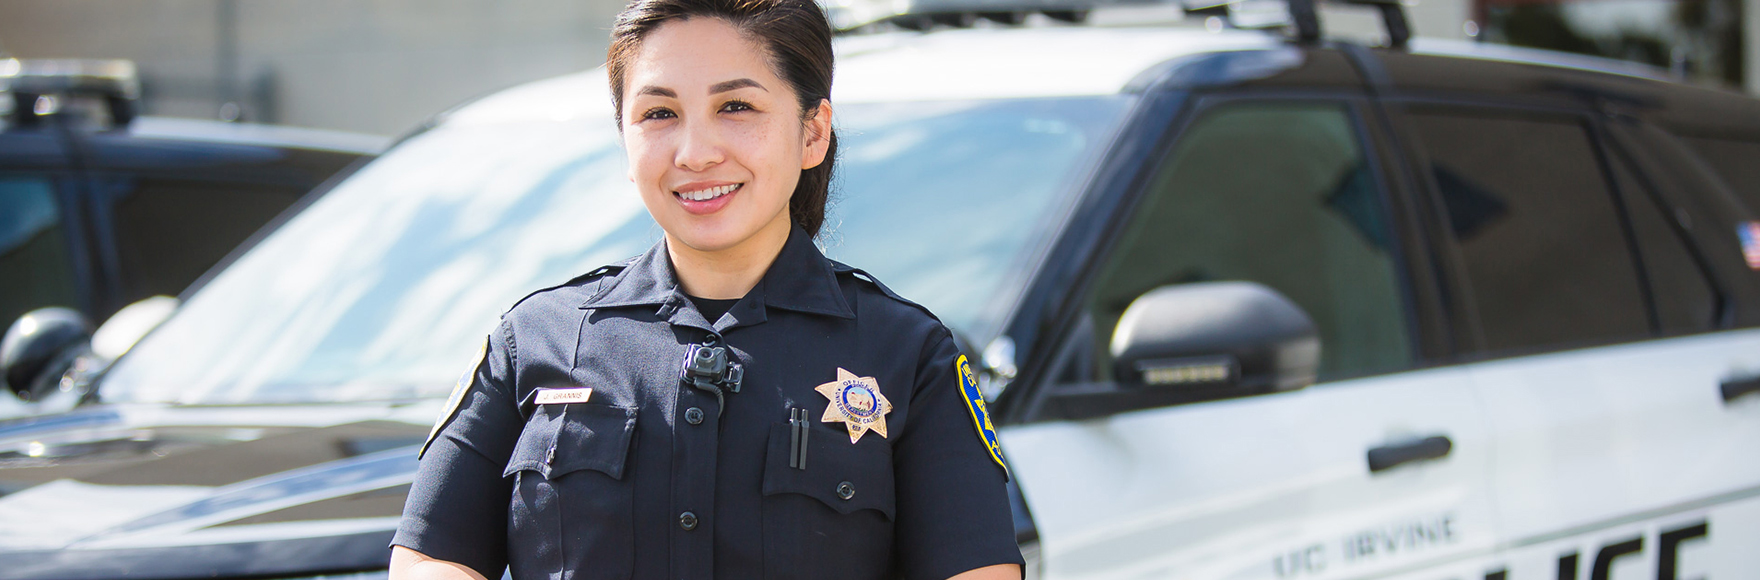 Officer Grannis smiling in front of a police car